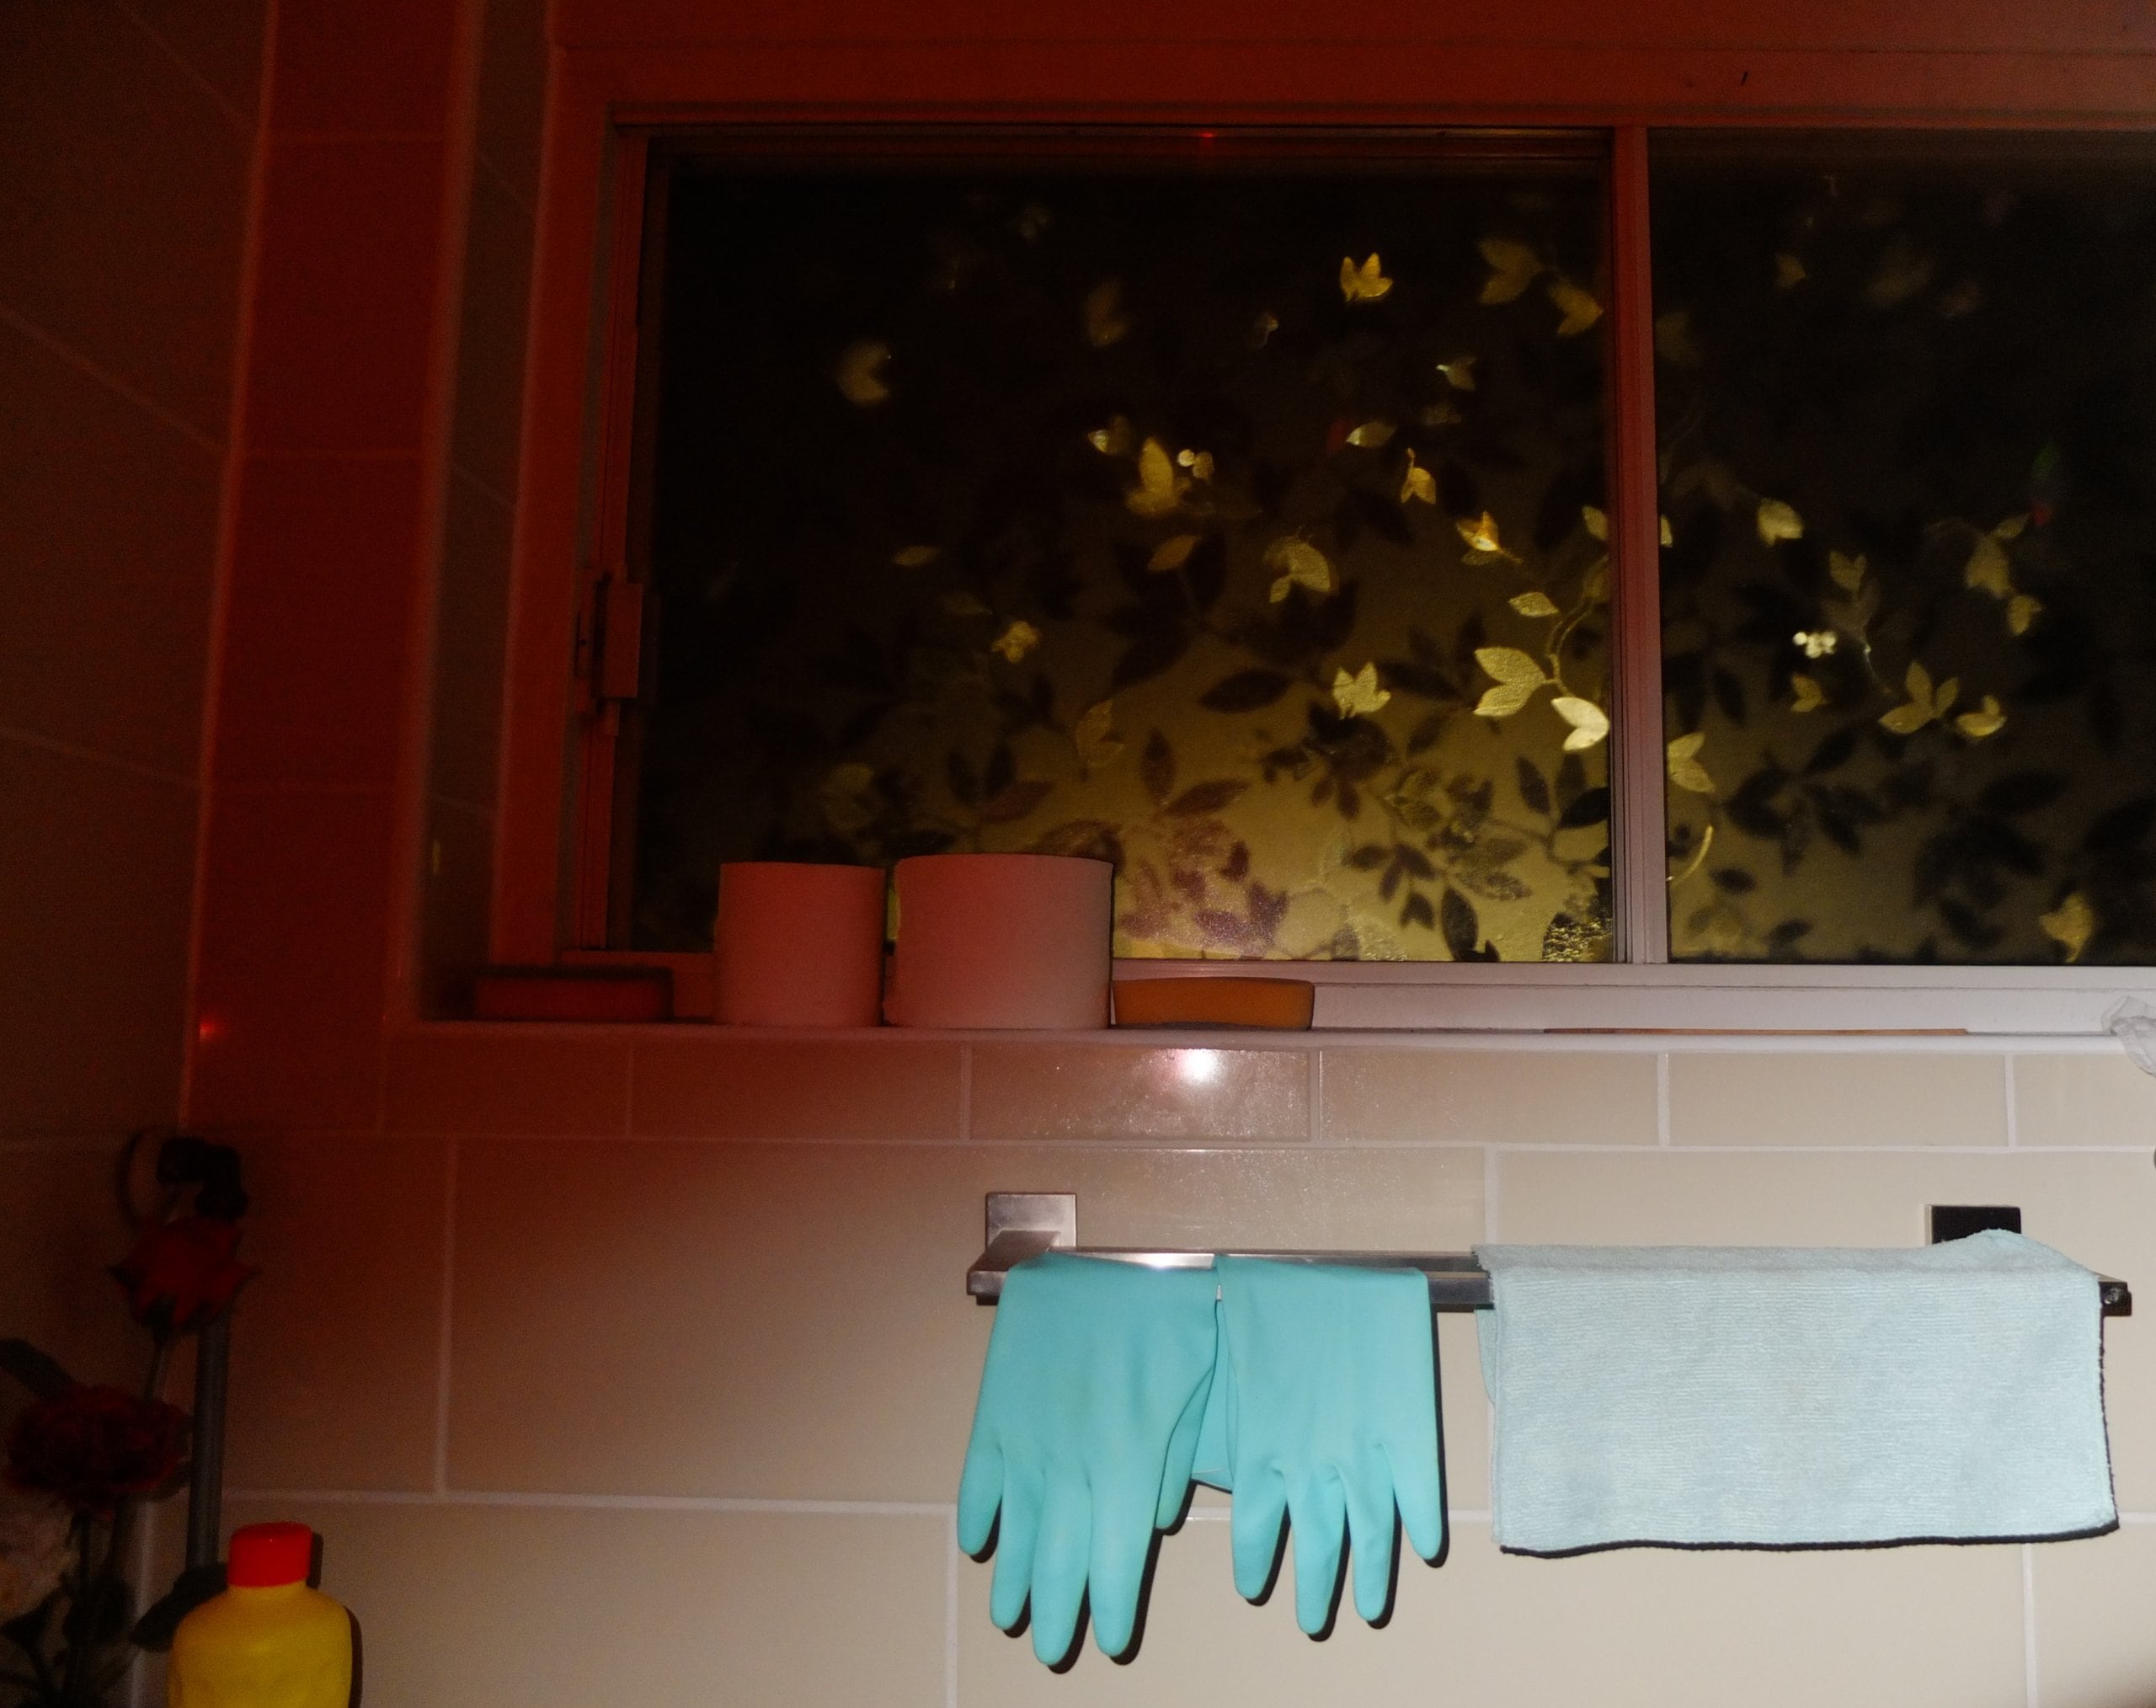 Rubber gloves and a wash cloth hanging on a bathroom rack.